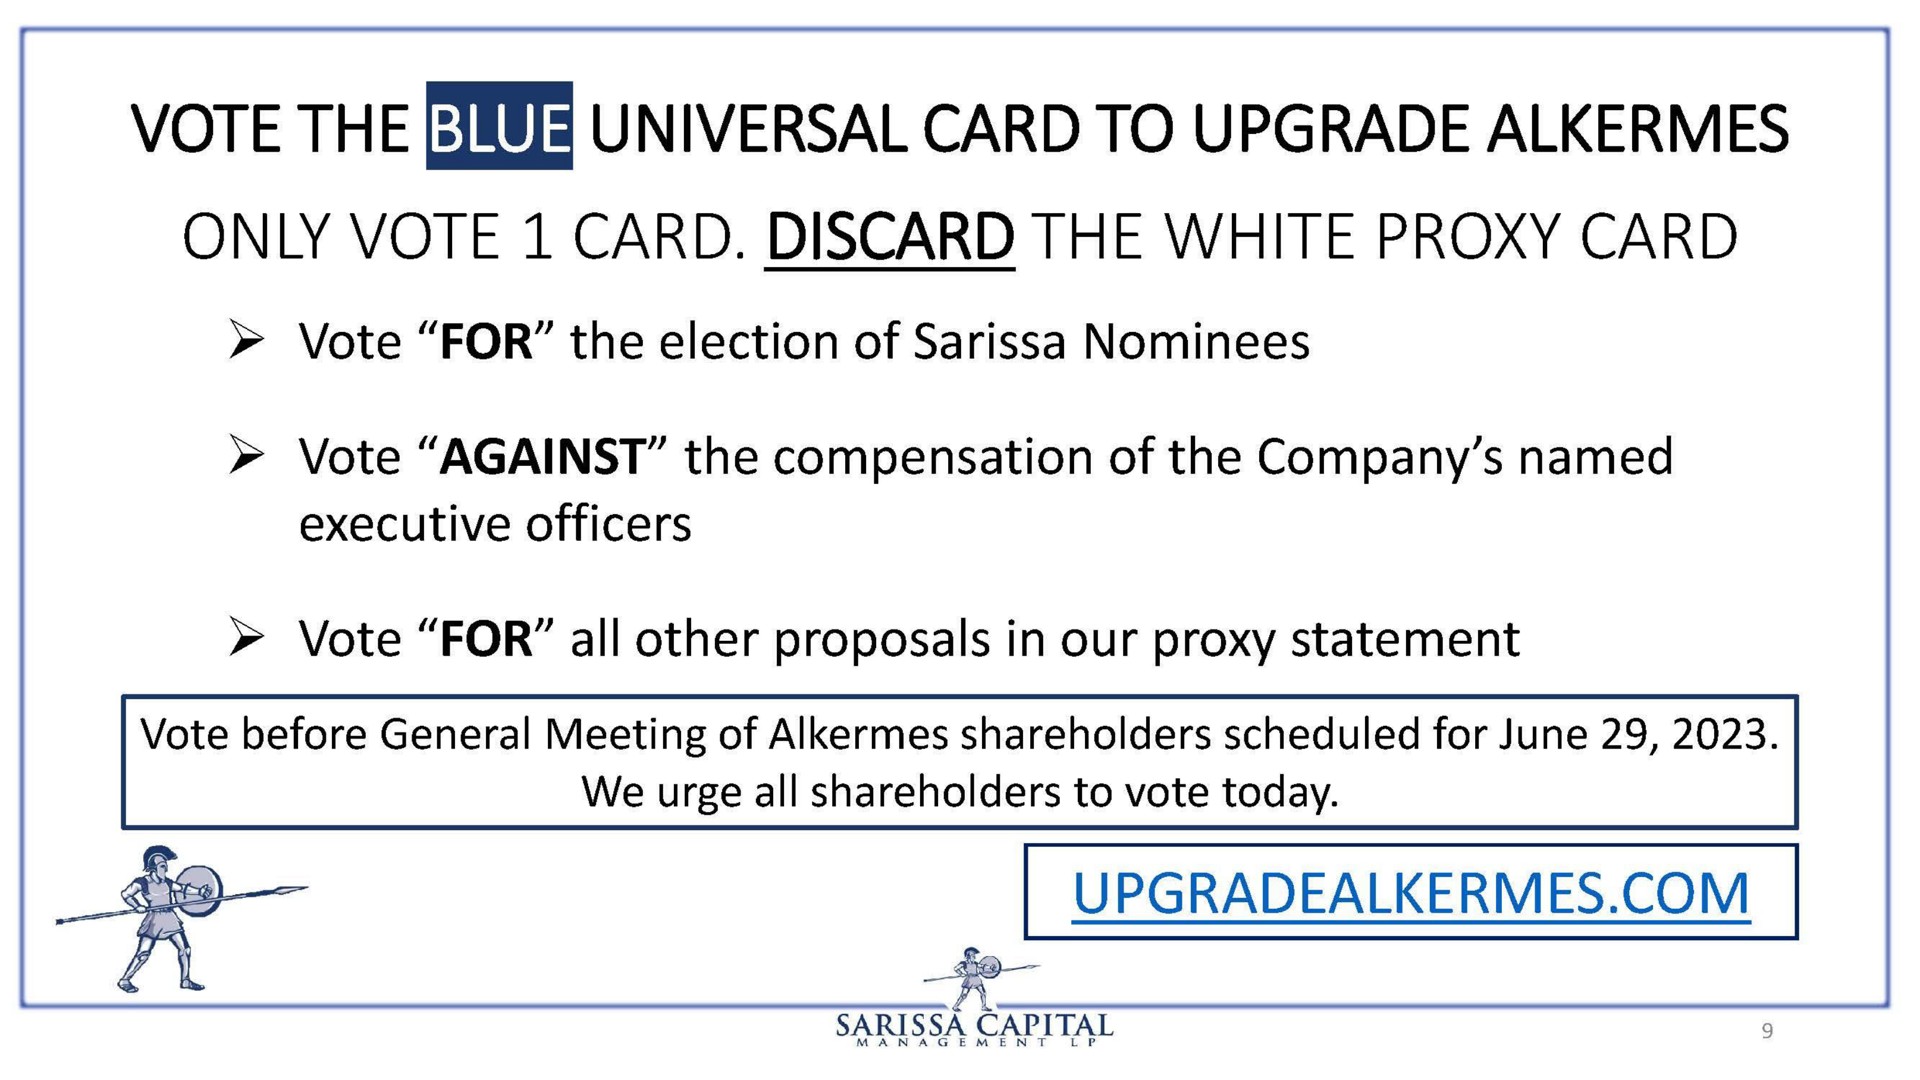 vote the universal card to upgrade alkermes only vote card discard the white proxy card | Sarissa Capital